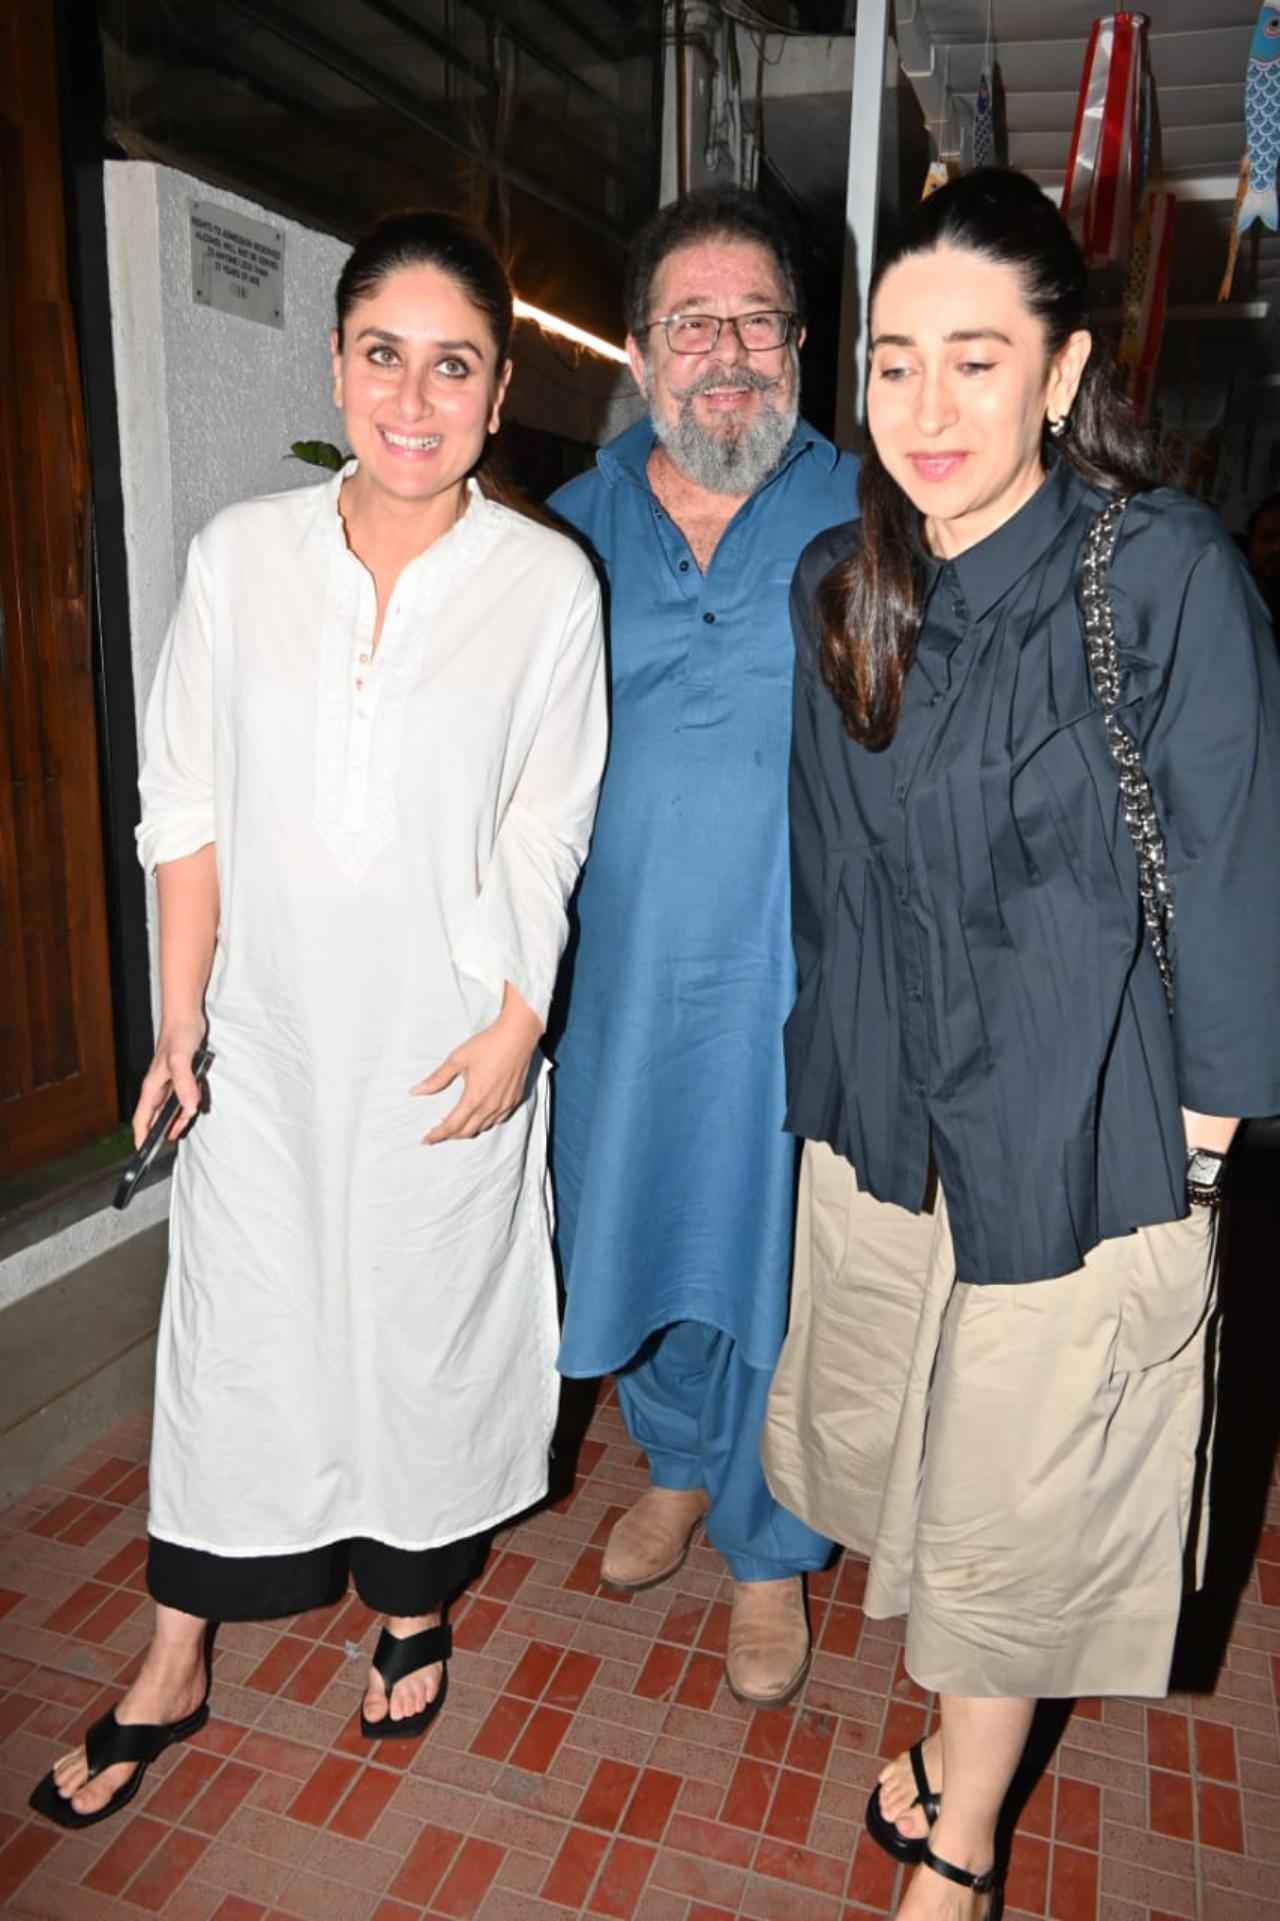 Karisma wore a black top, a beige skirt and black heels. Saif was seen in a black shirt and denims